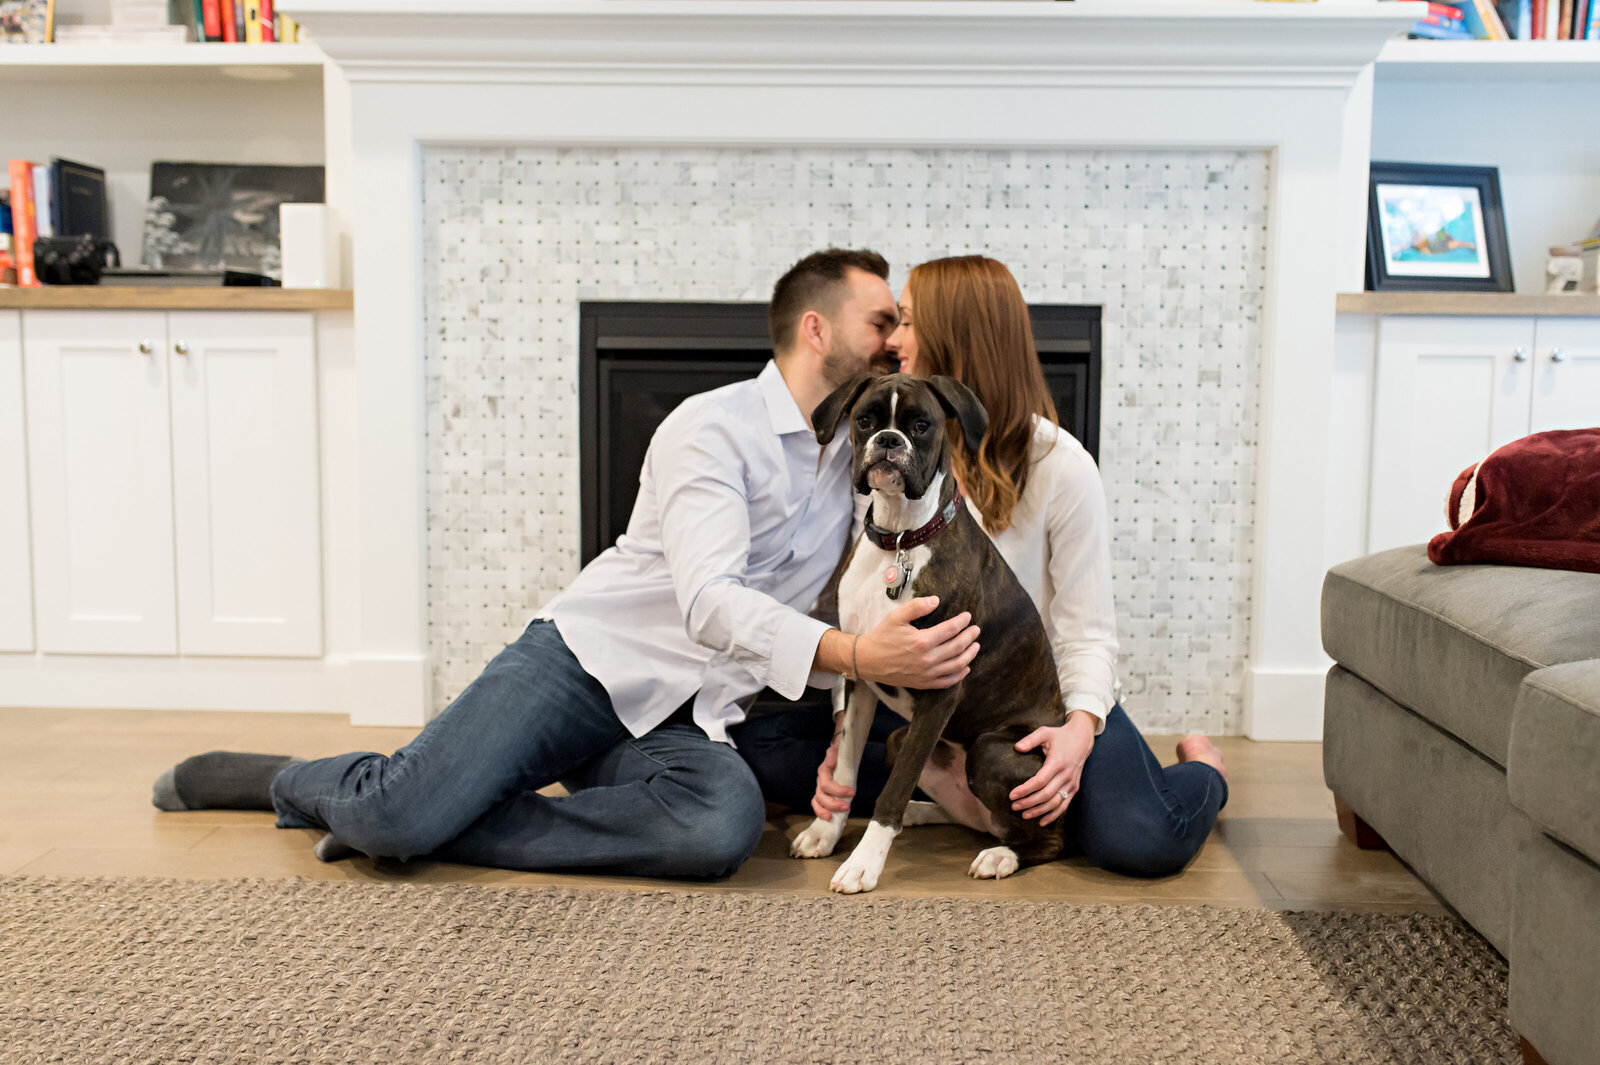 EngagementPictures-70